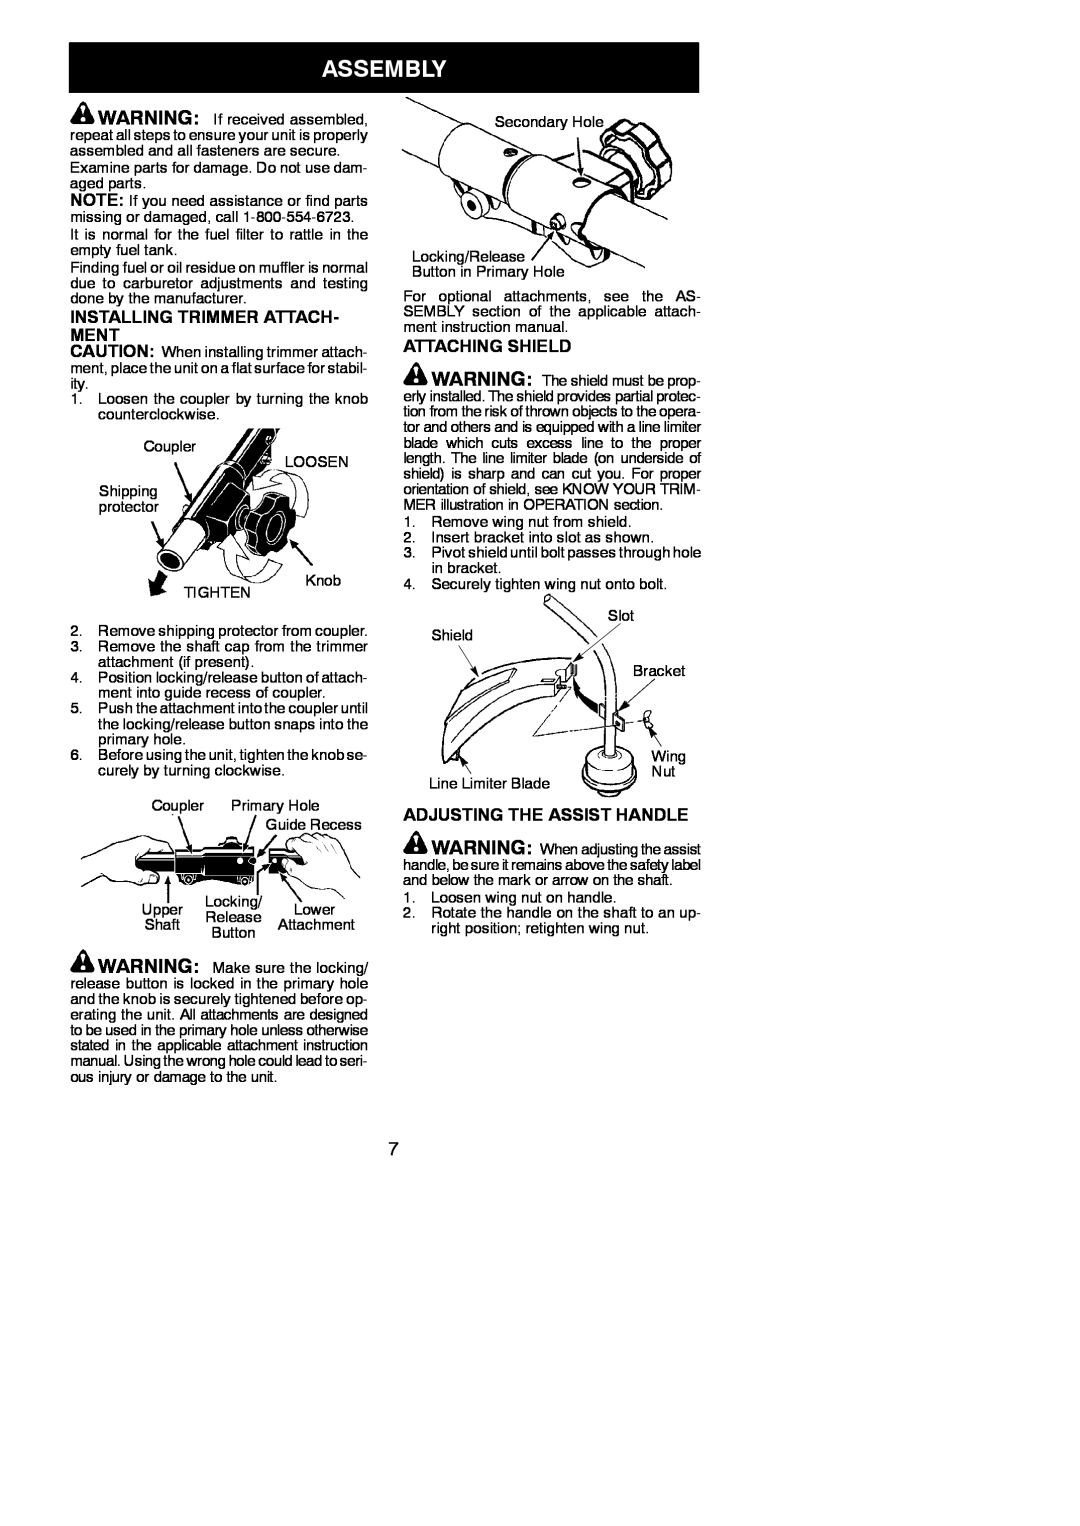 Poulan PPB100E instruction manual Assembly, Installing Trimmer Attach- Ment, Attaching Shield, Adjusting The Assist Handle 